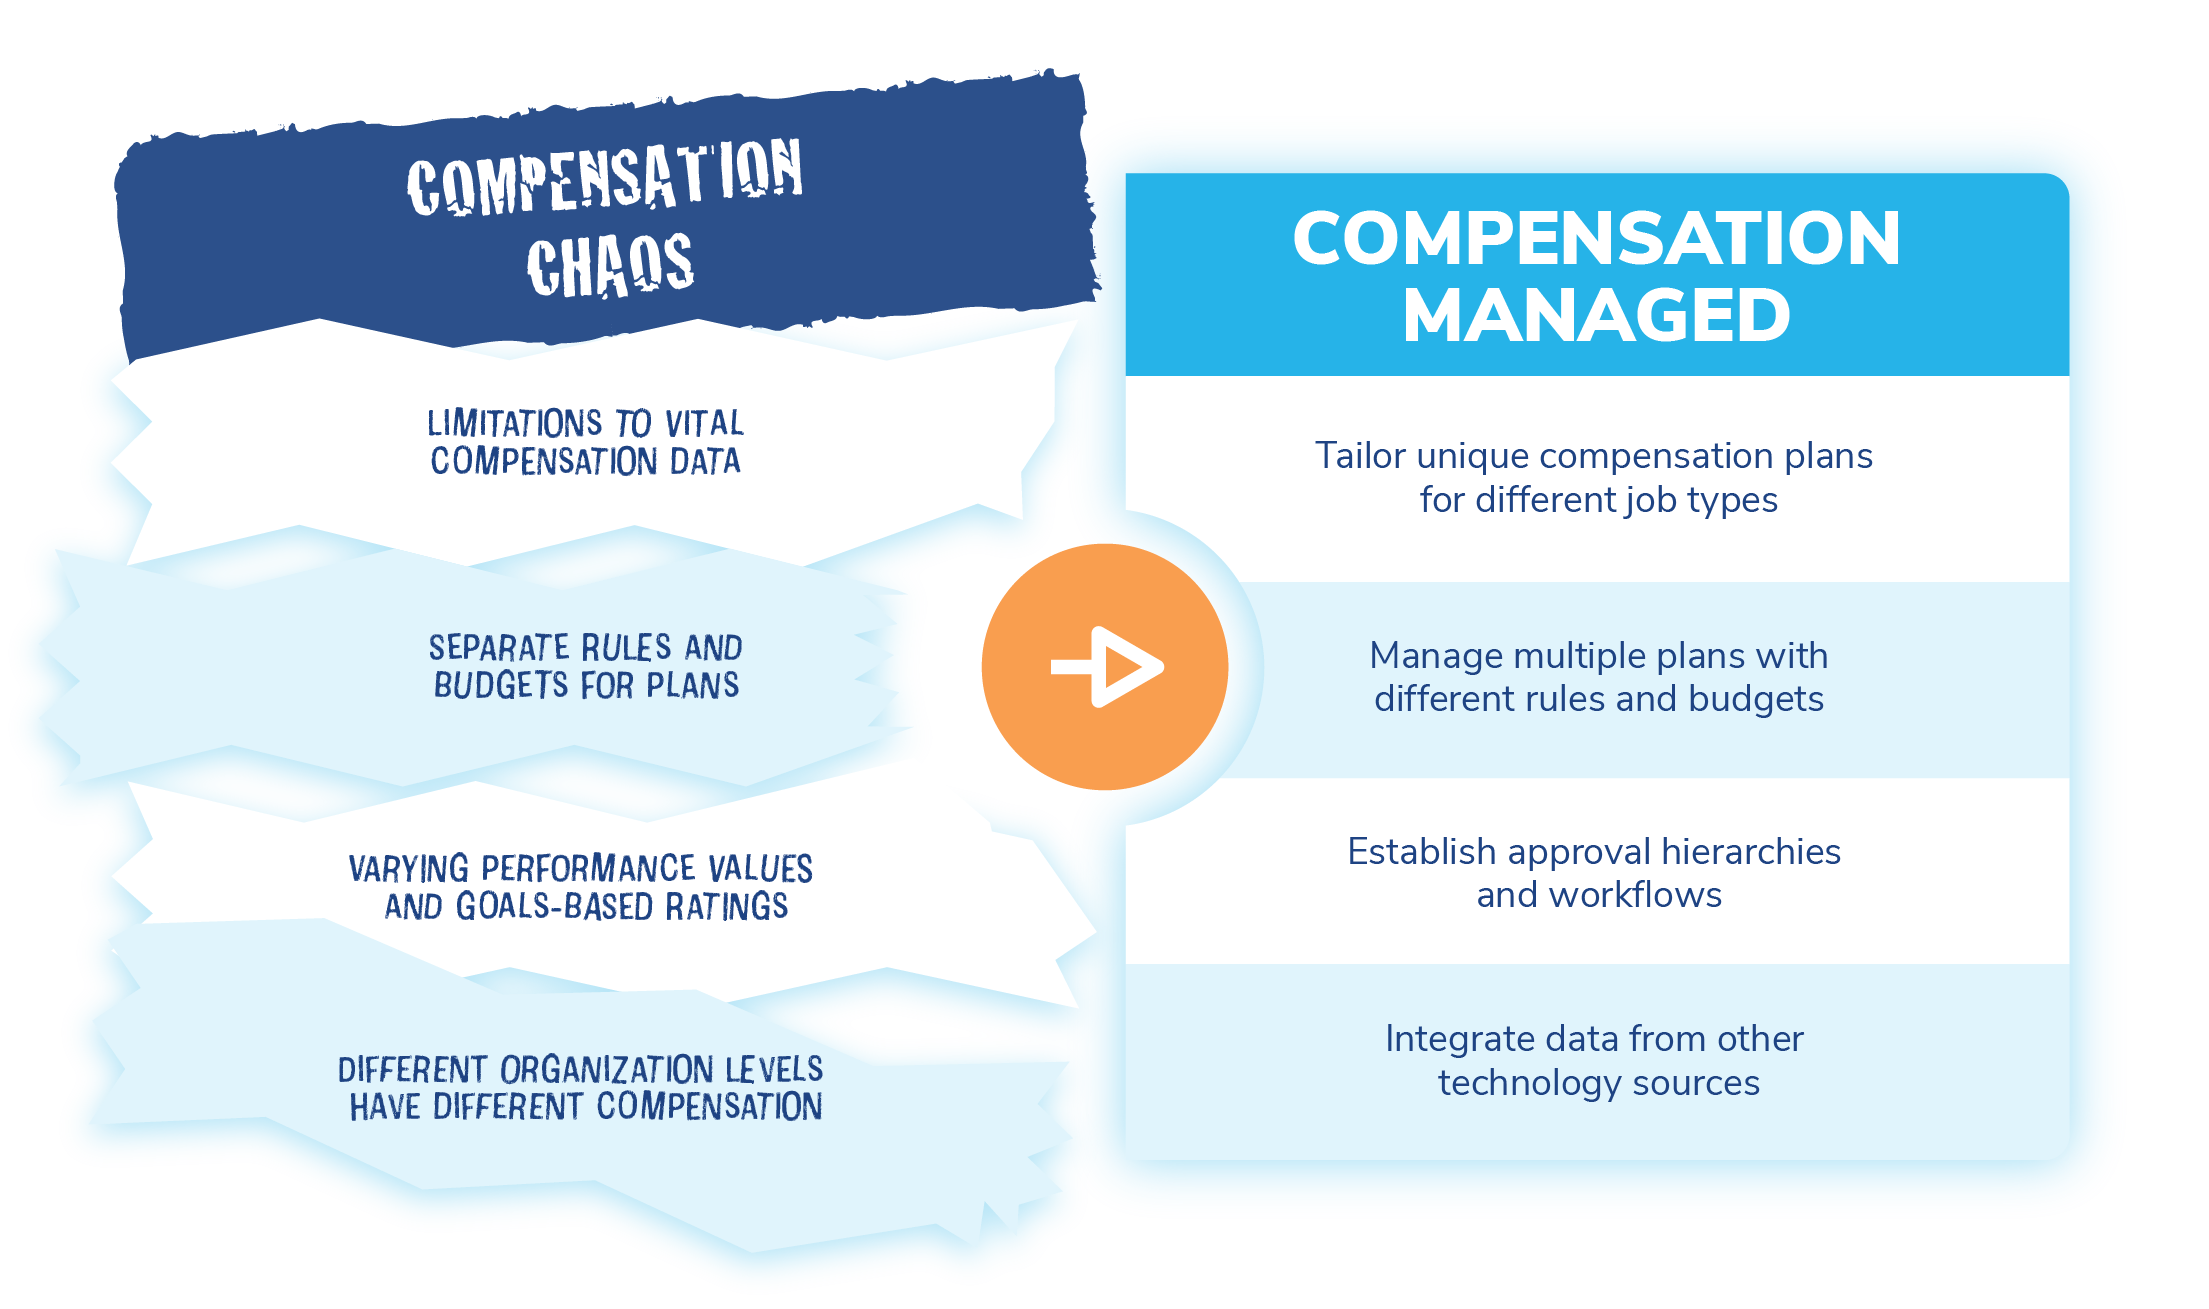 A graphic showing how HRSoft turns compensation chaos into managed compensation